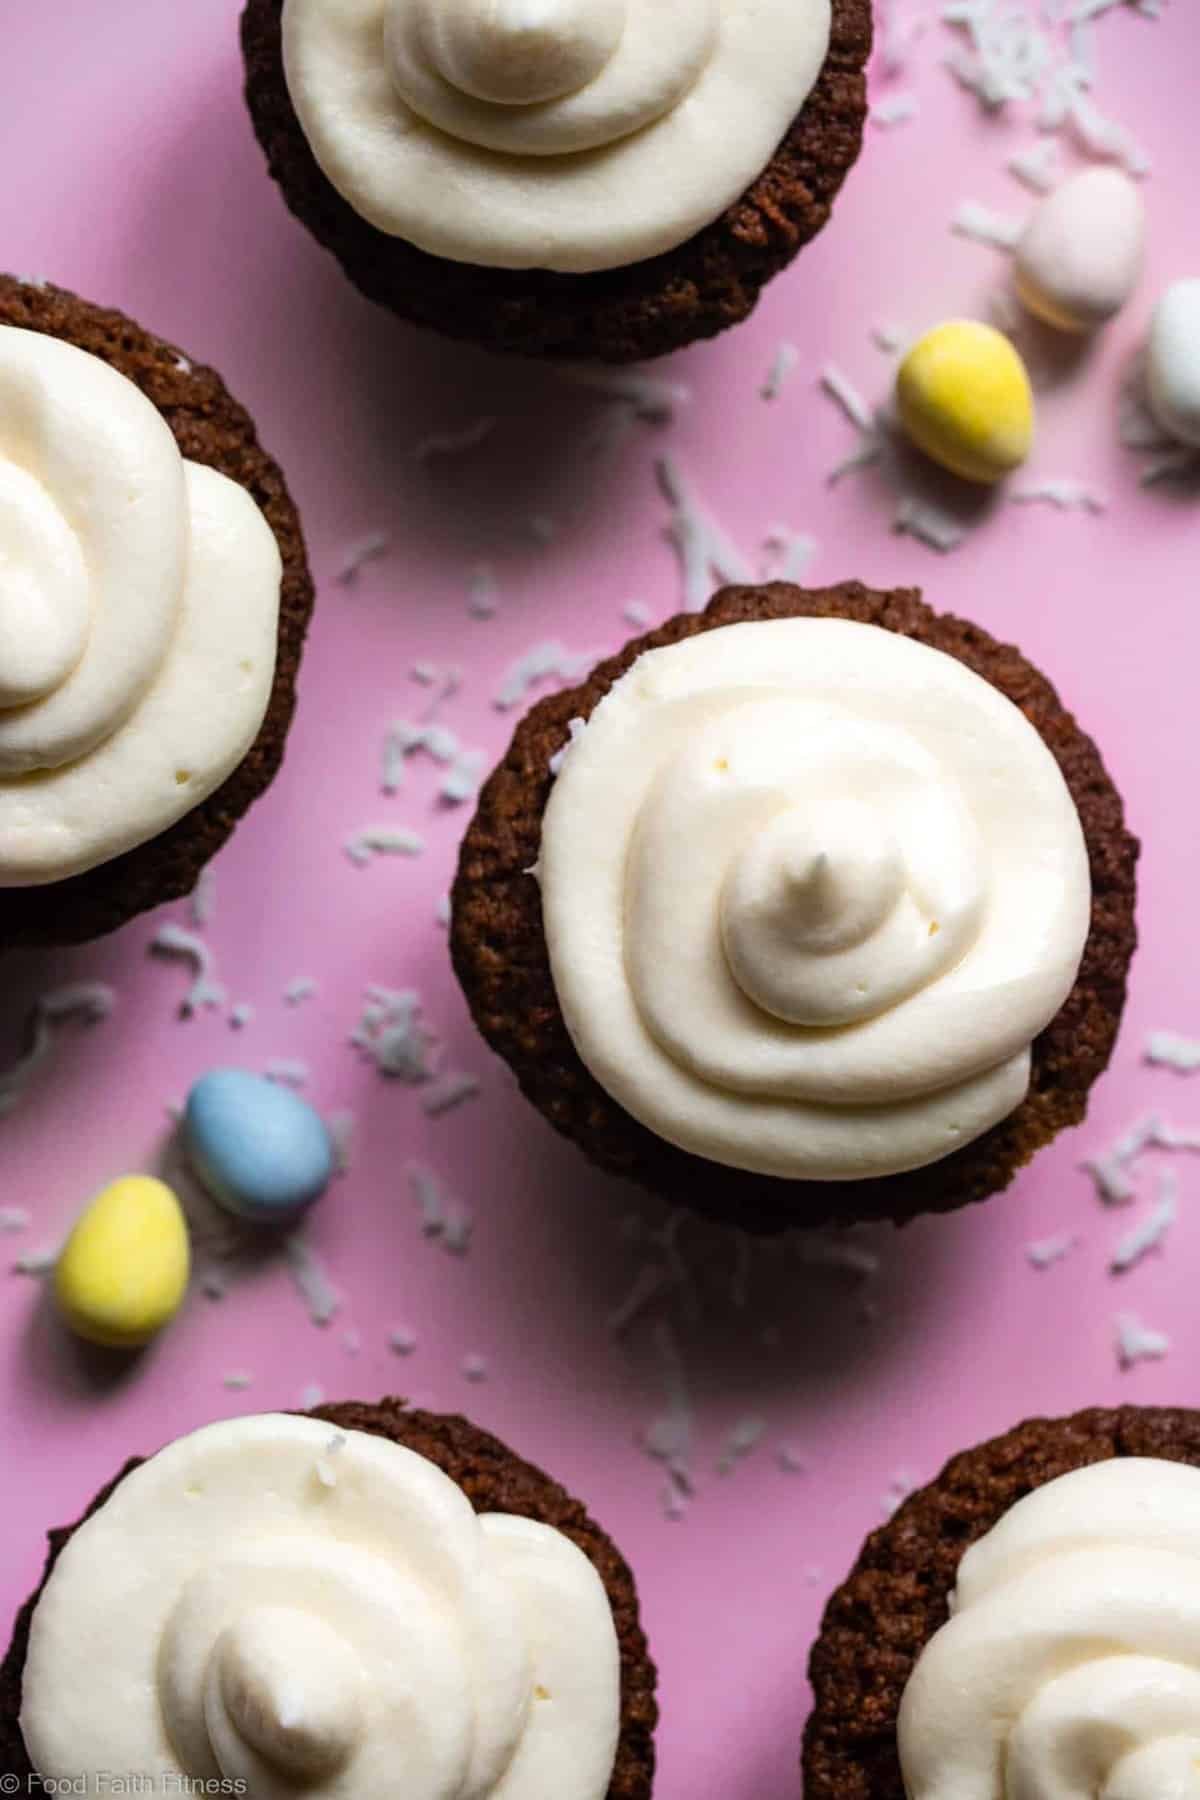 Gluten Free Grain Free Carrot Cake Cupcakes - These Gluten Free Carrot Cake Cupcakes with Coconut Flour are tender, light, moist and perfectly spicy-sweet! No one will believe they are gluten free! Dairy free option included! | #Foodfaithfitness | #Glutenfree #Dairyfree #Easter #Healthy #Cupcakes